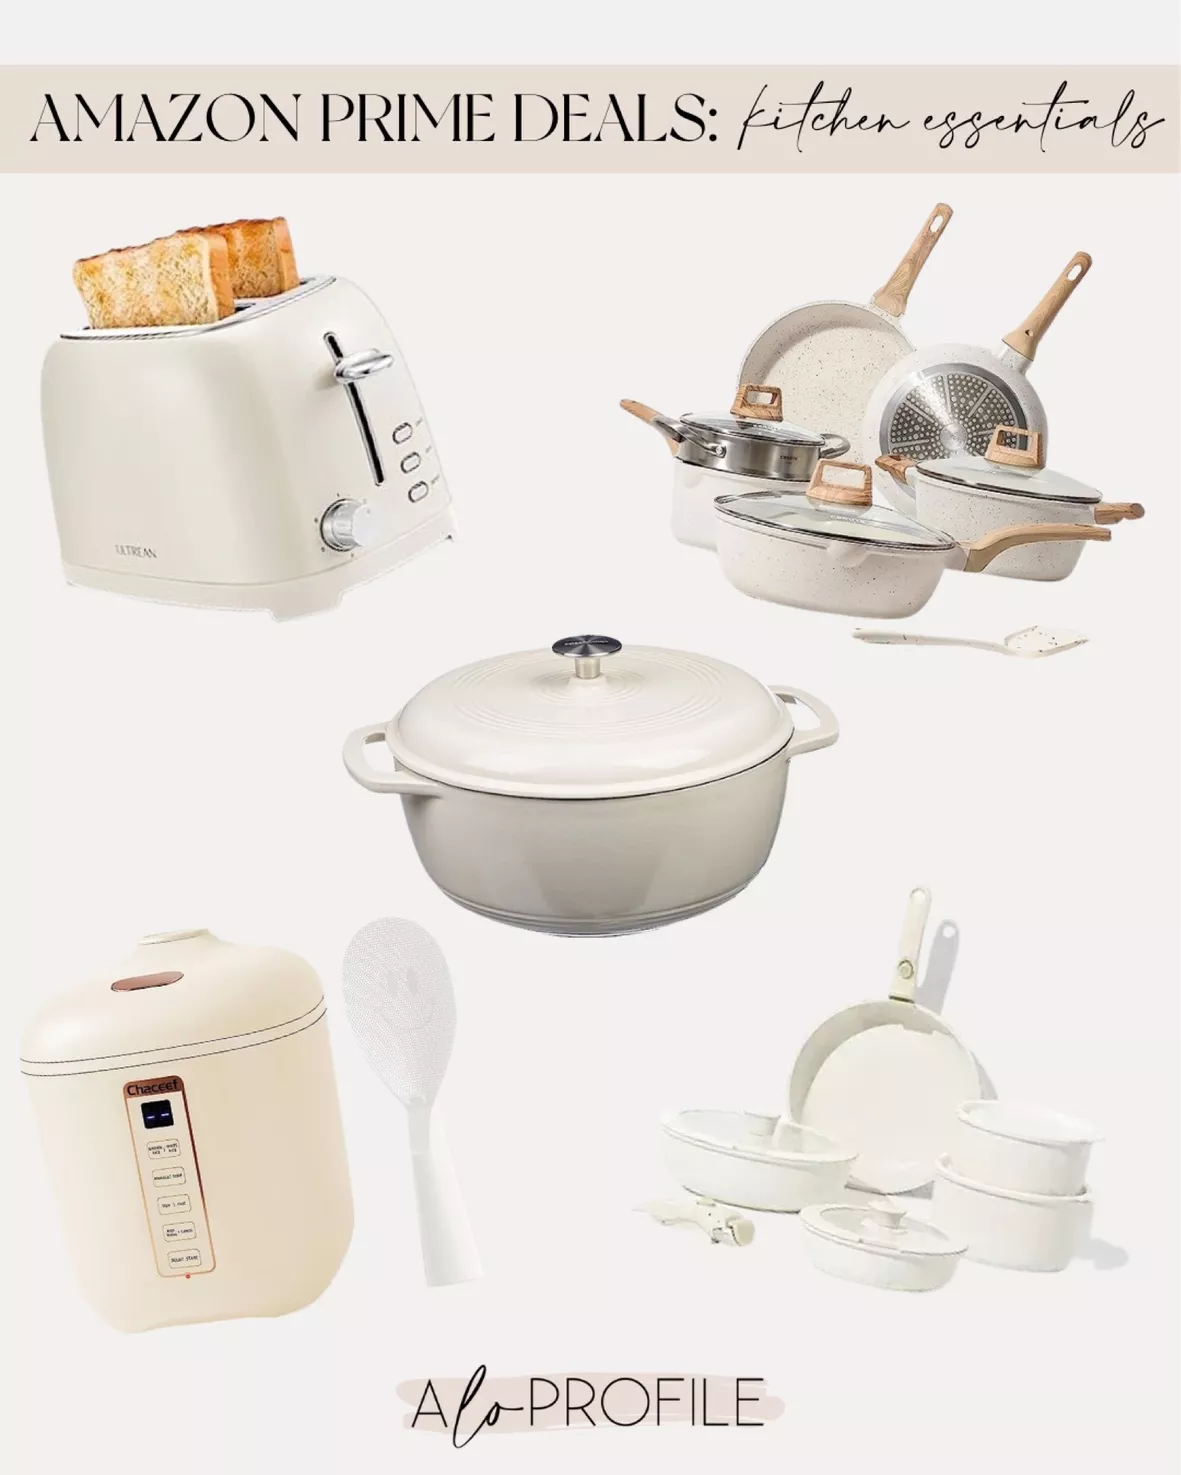 CHACEEF Mini Rice Cooker 2-Cups Uncooked, 1.2L Portable Non-Stick